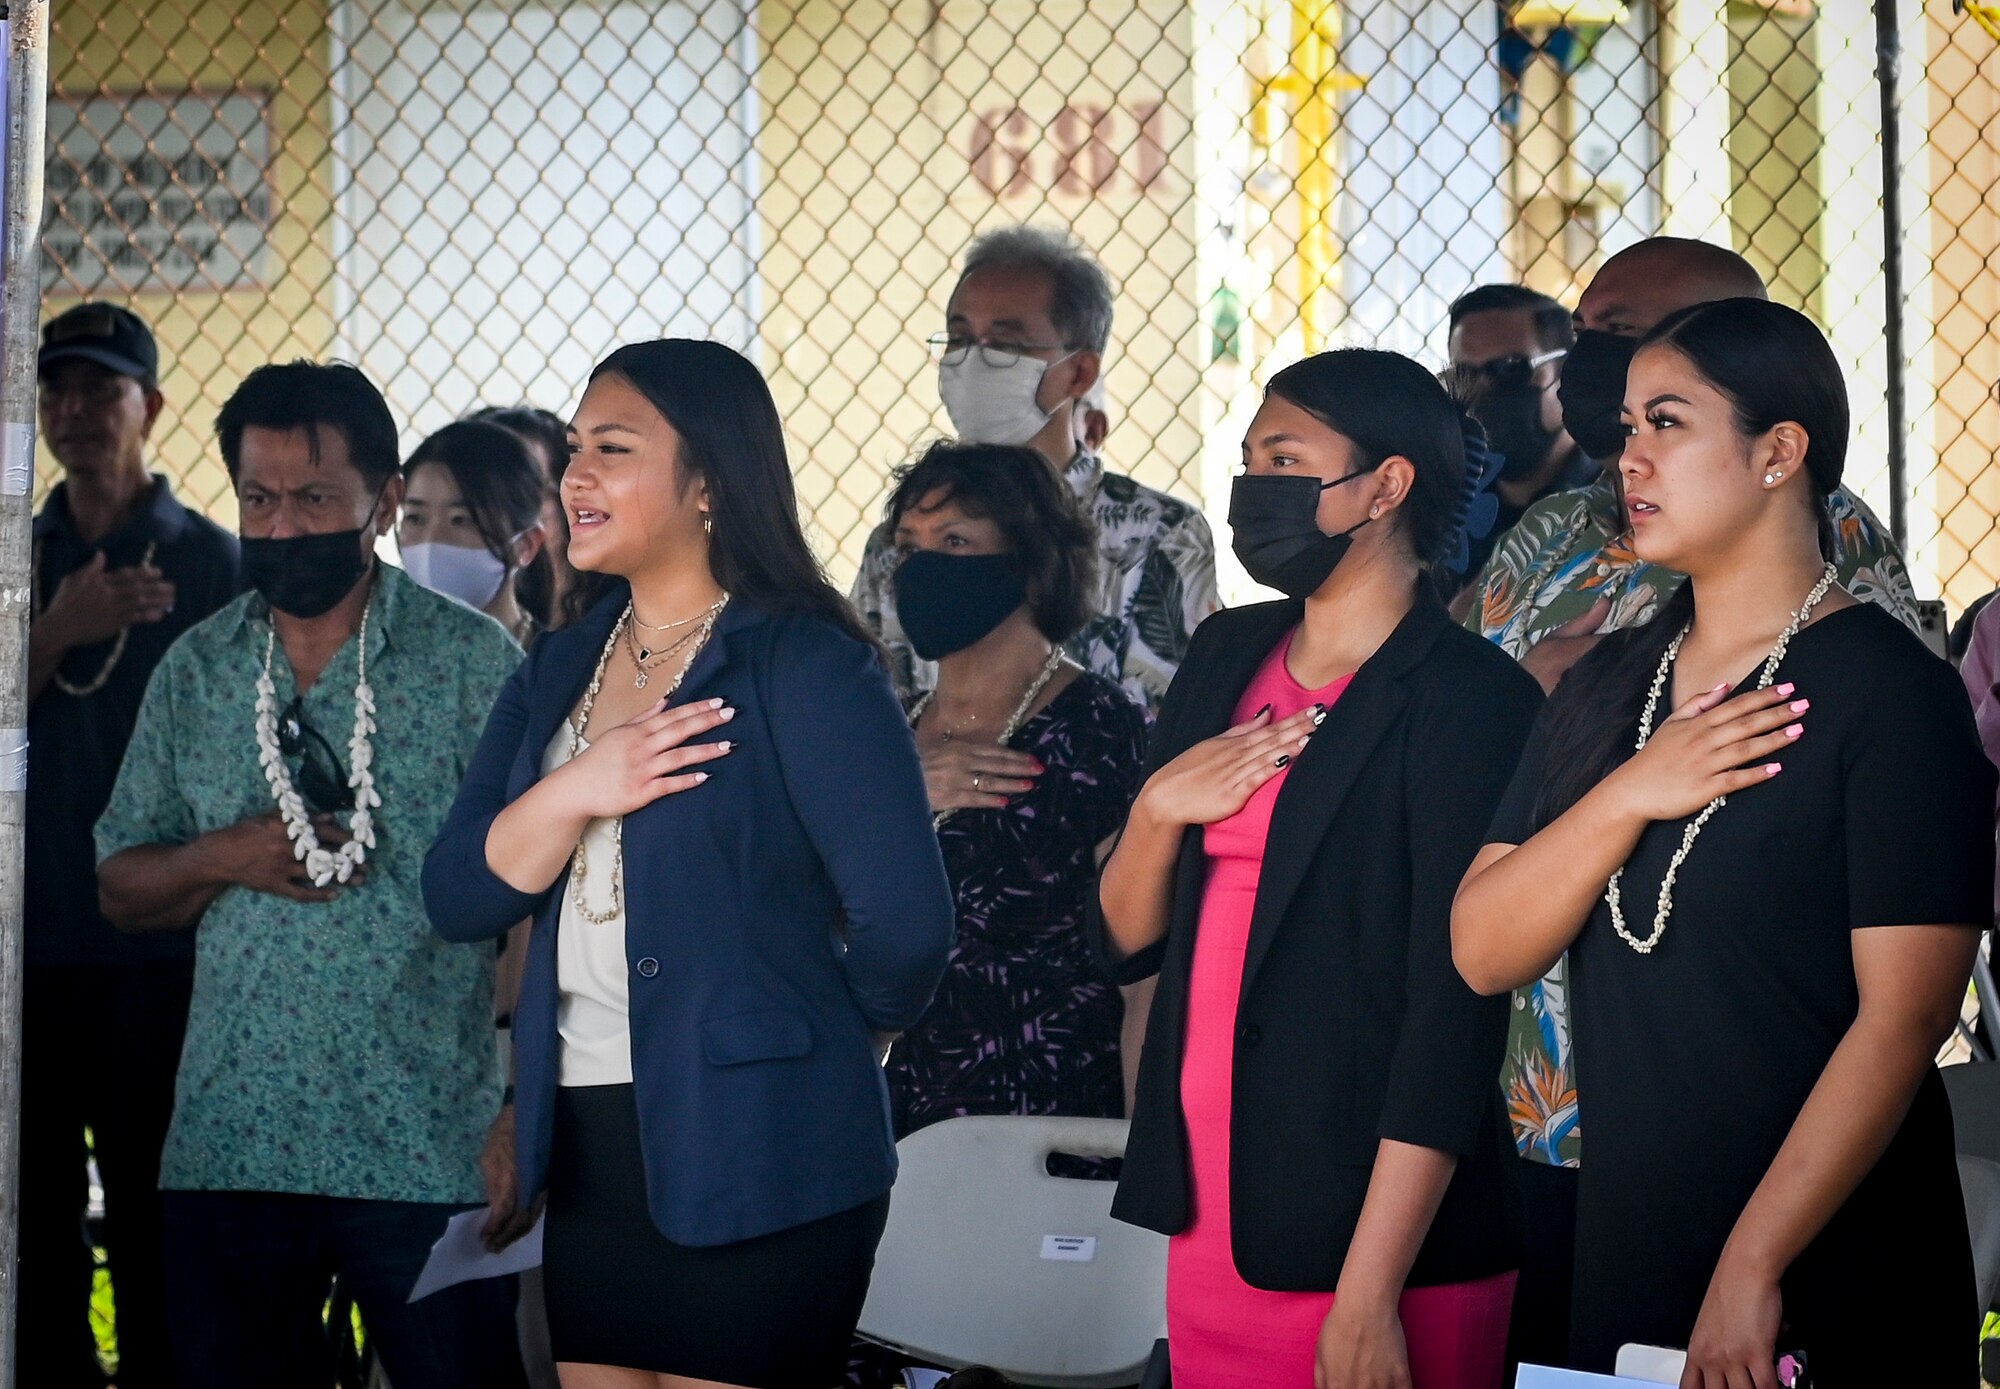 Local Chamoru families sing the Guam Hymn during the Hasso Monmong-Toto-Maite Marine Depot Memorial Ceremony in Maite, Guam on July 7, 2022.